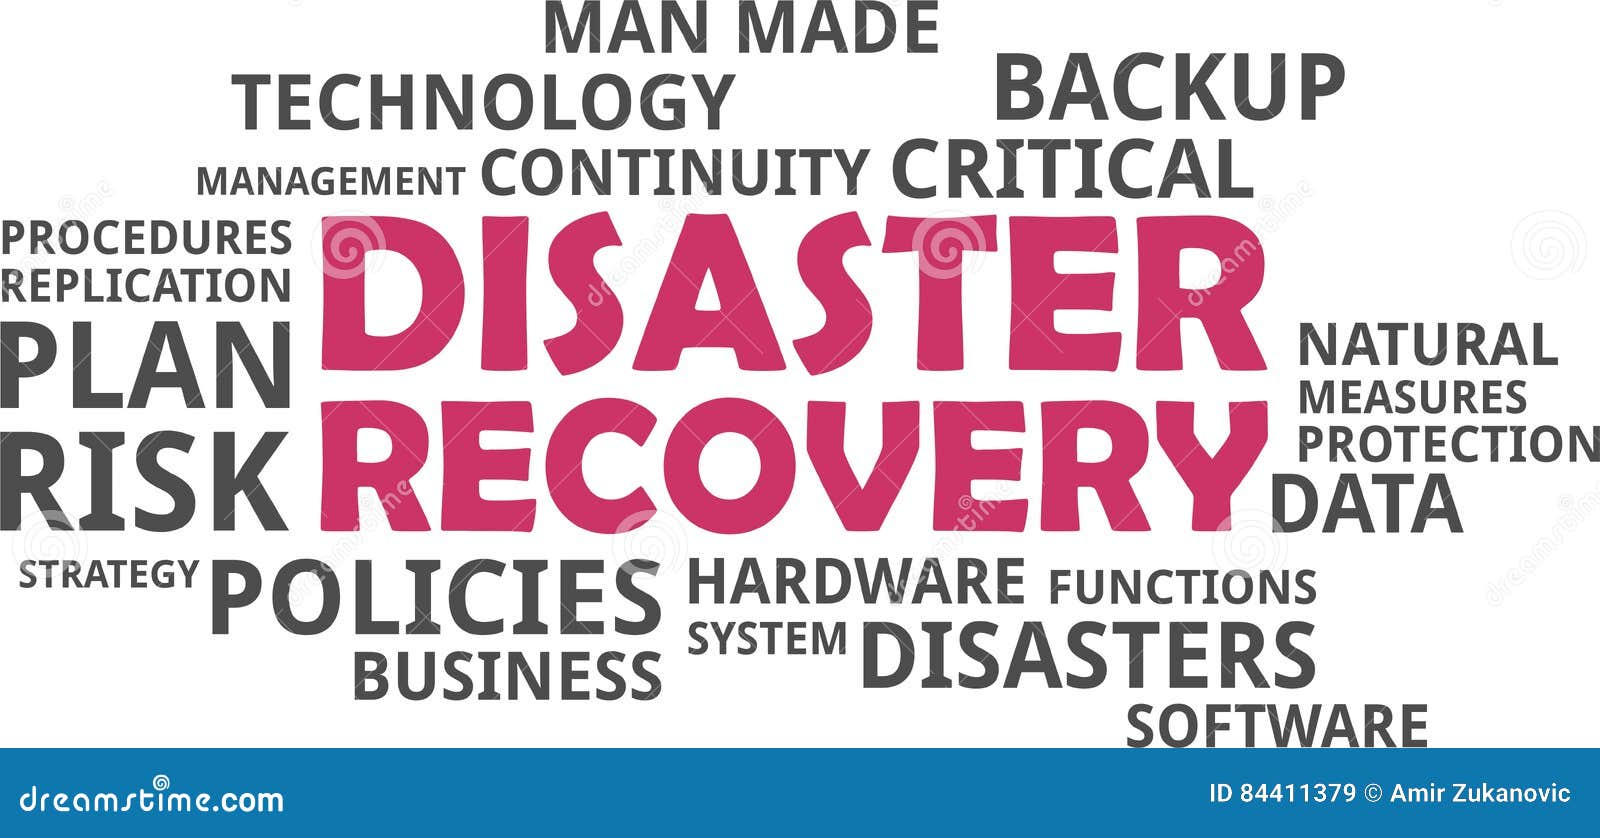 word cloud - disaster recovery